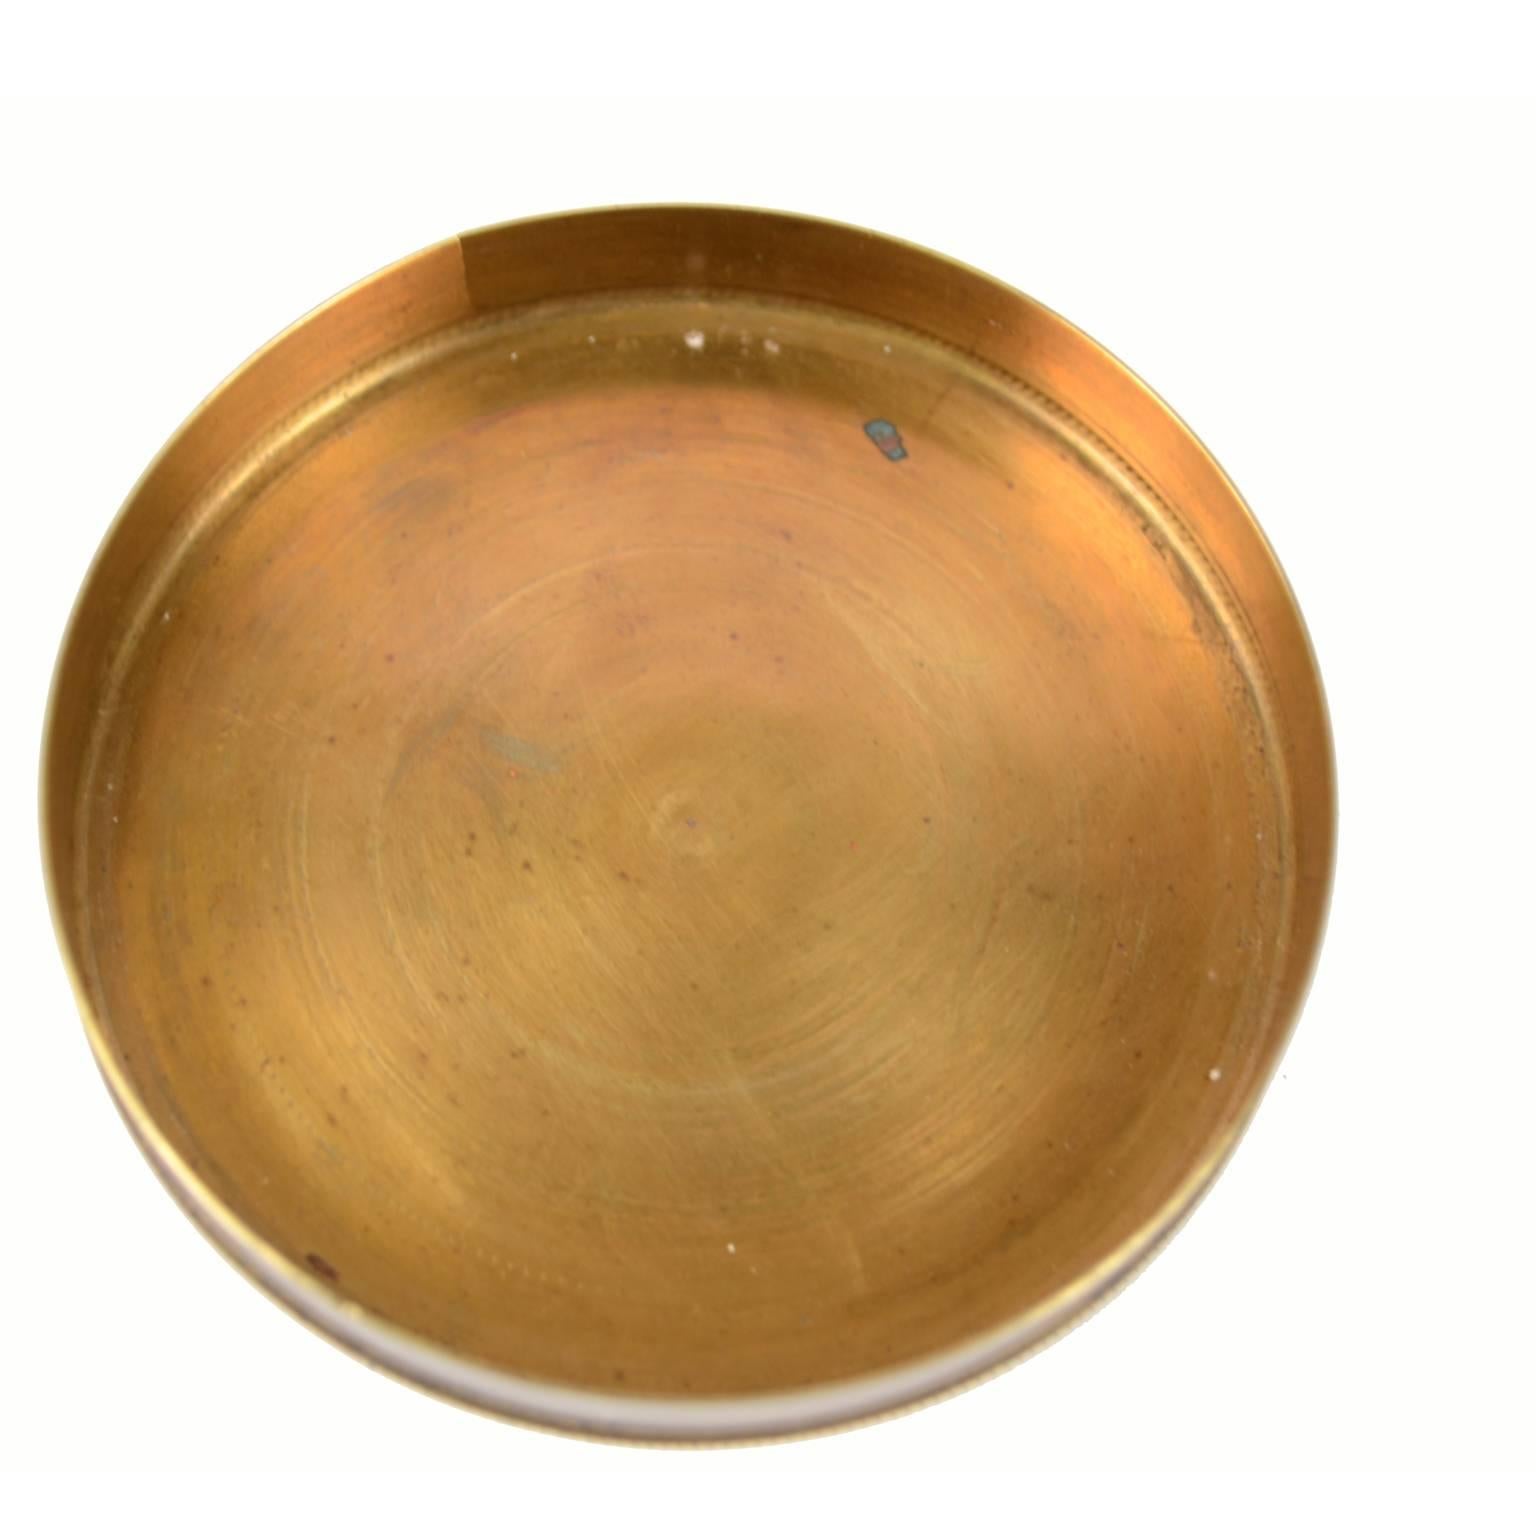 American Compass Placed in Its Original Box of Turned Brass 8